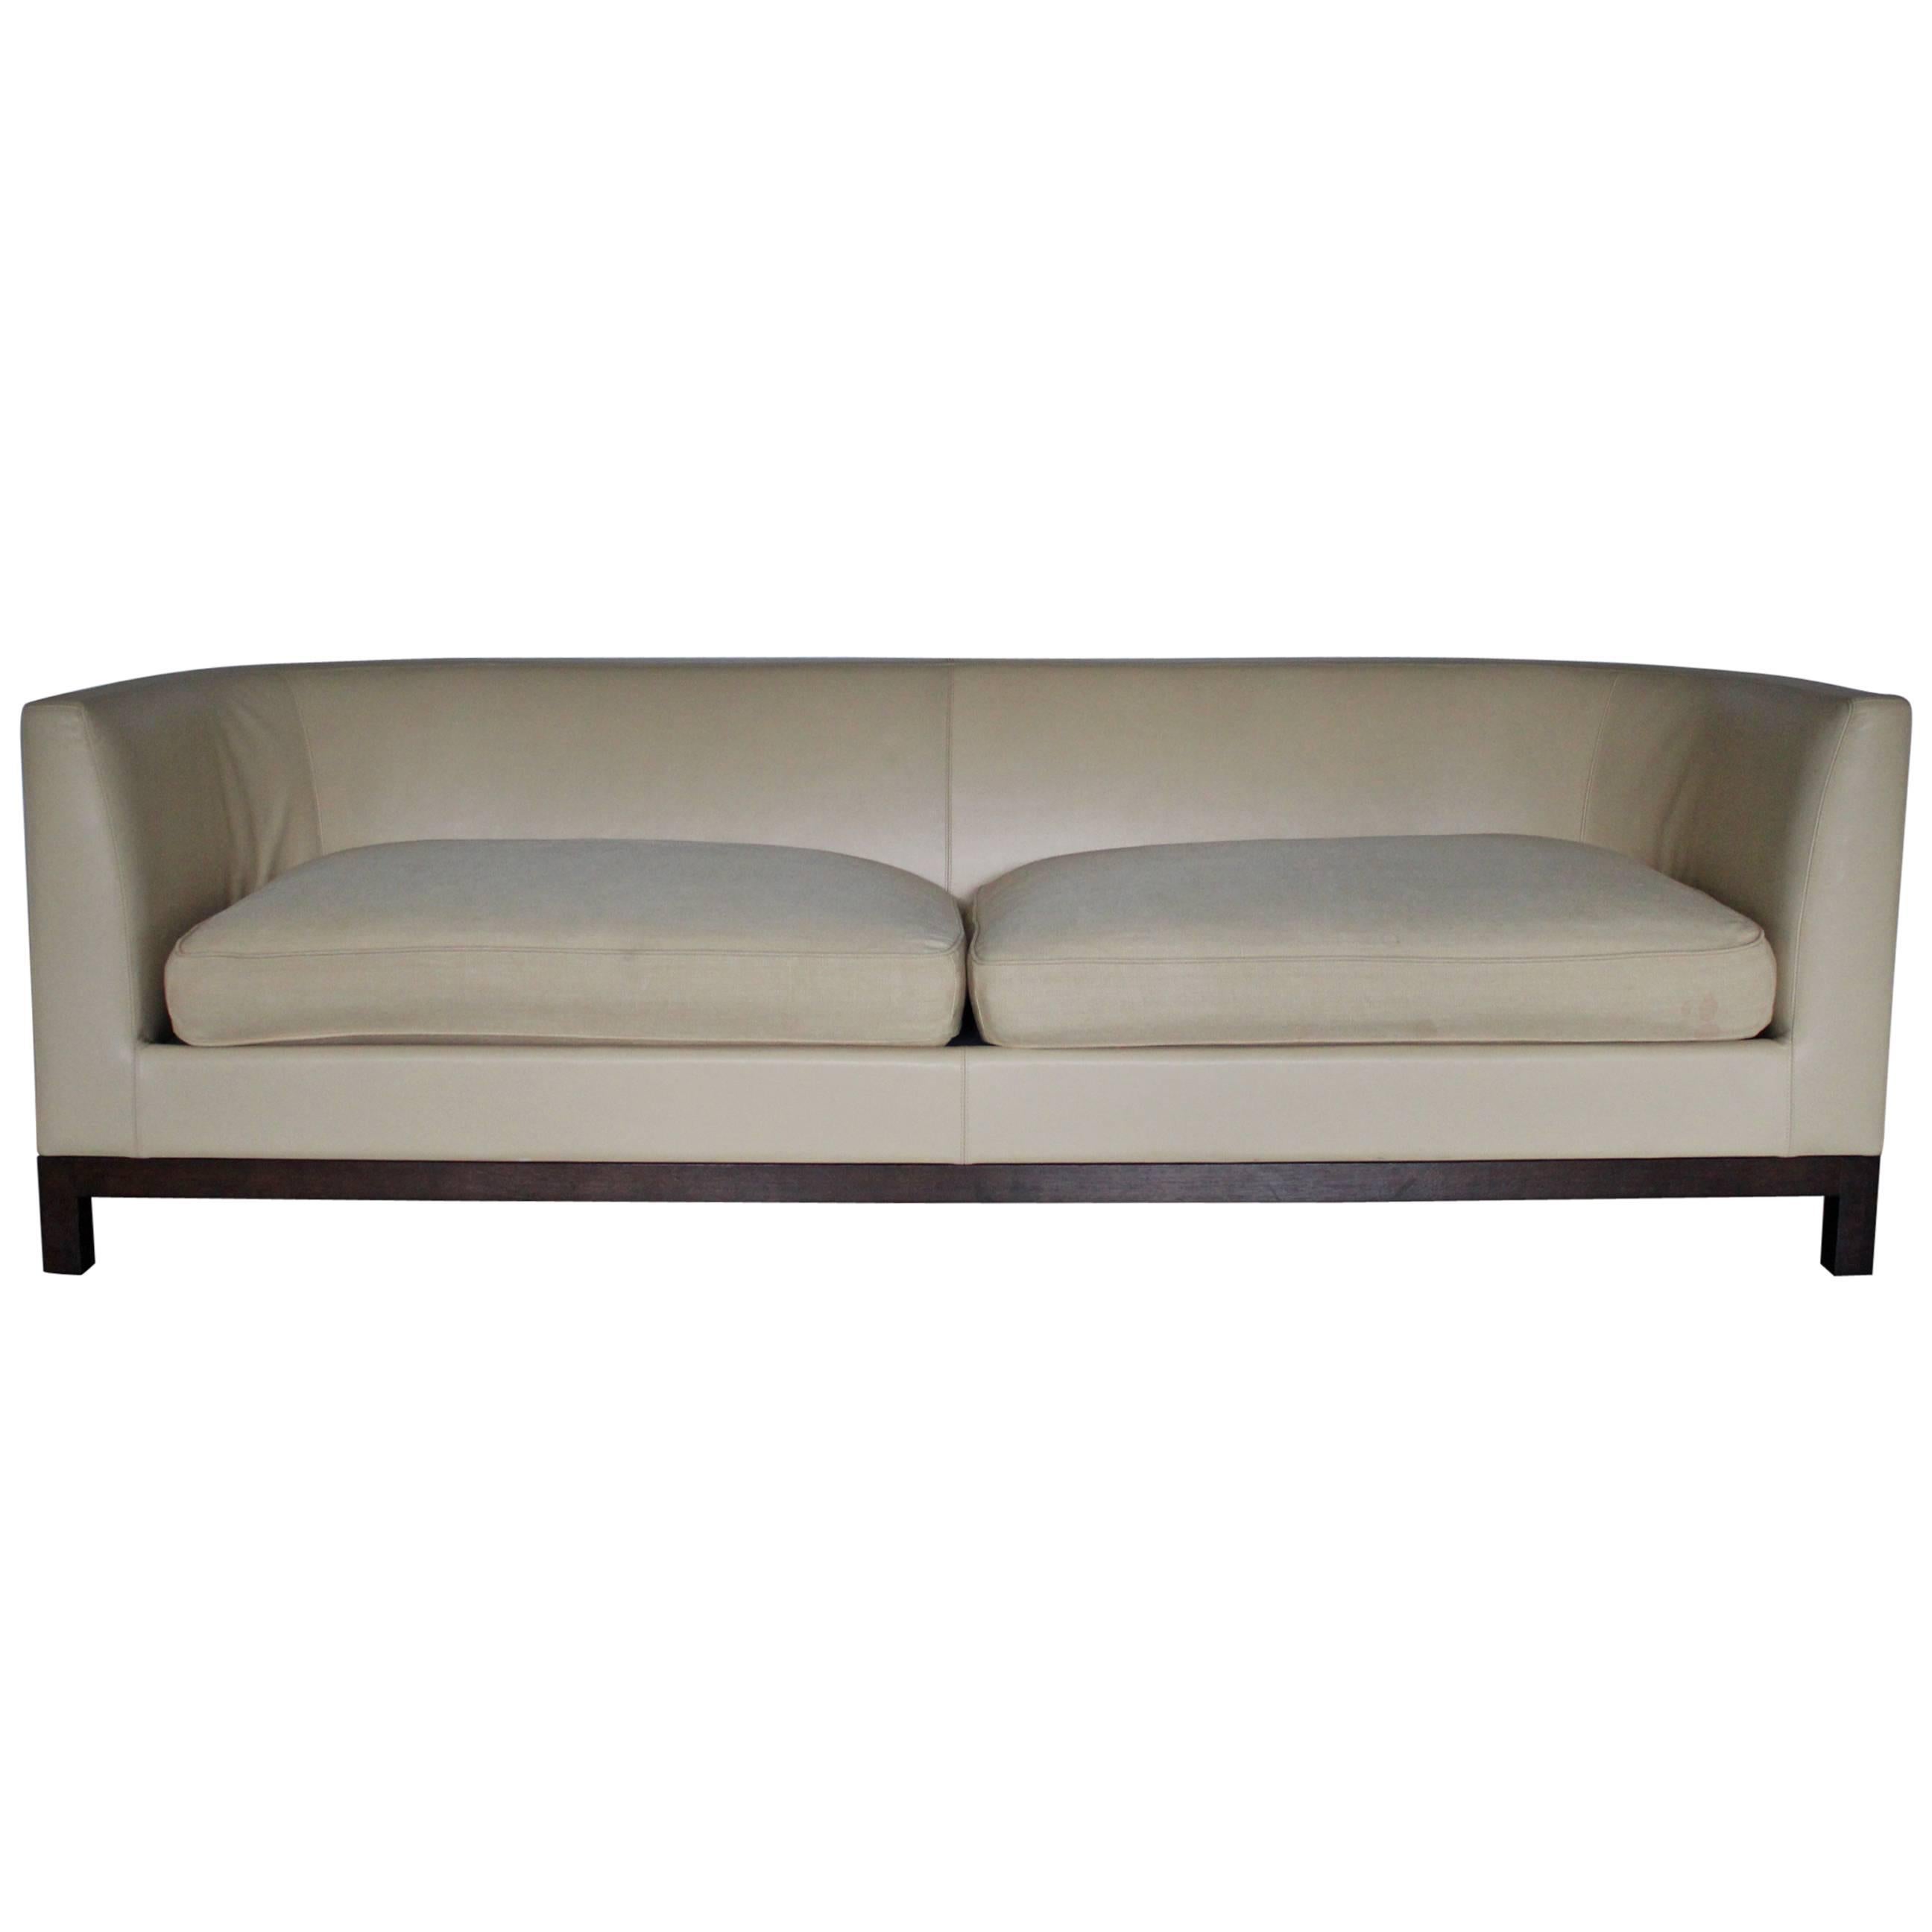 Christian Liaigre "Curved-Back" Three-Seat Sofa in Cream Leather and Linen